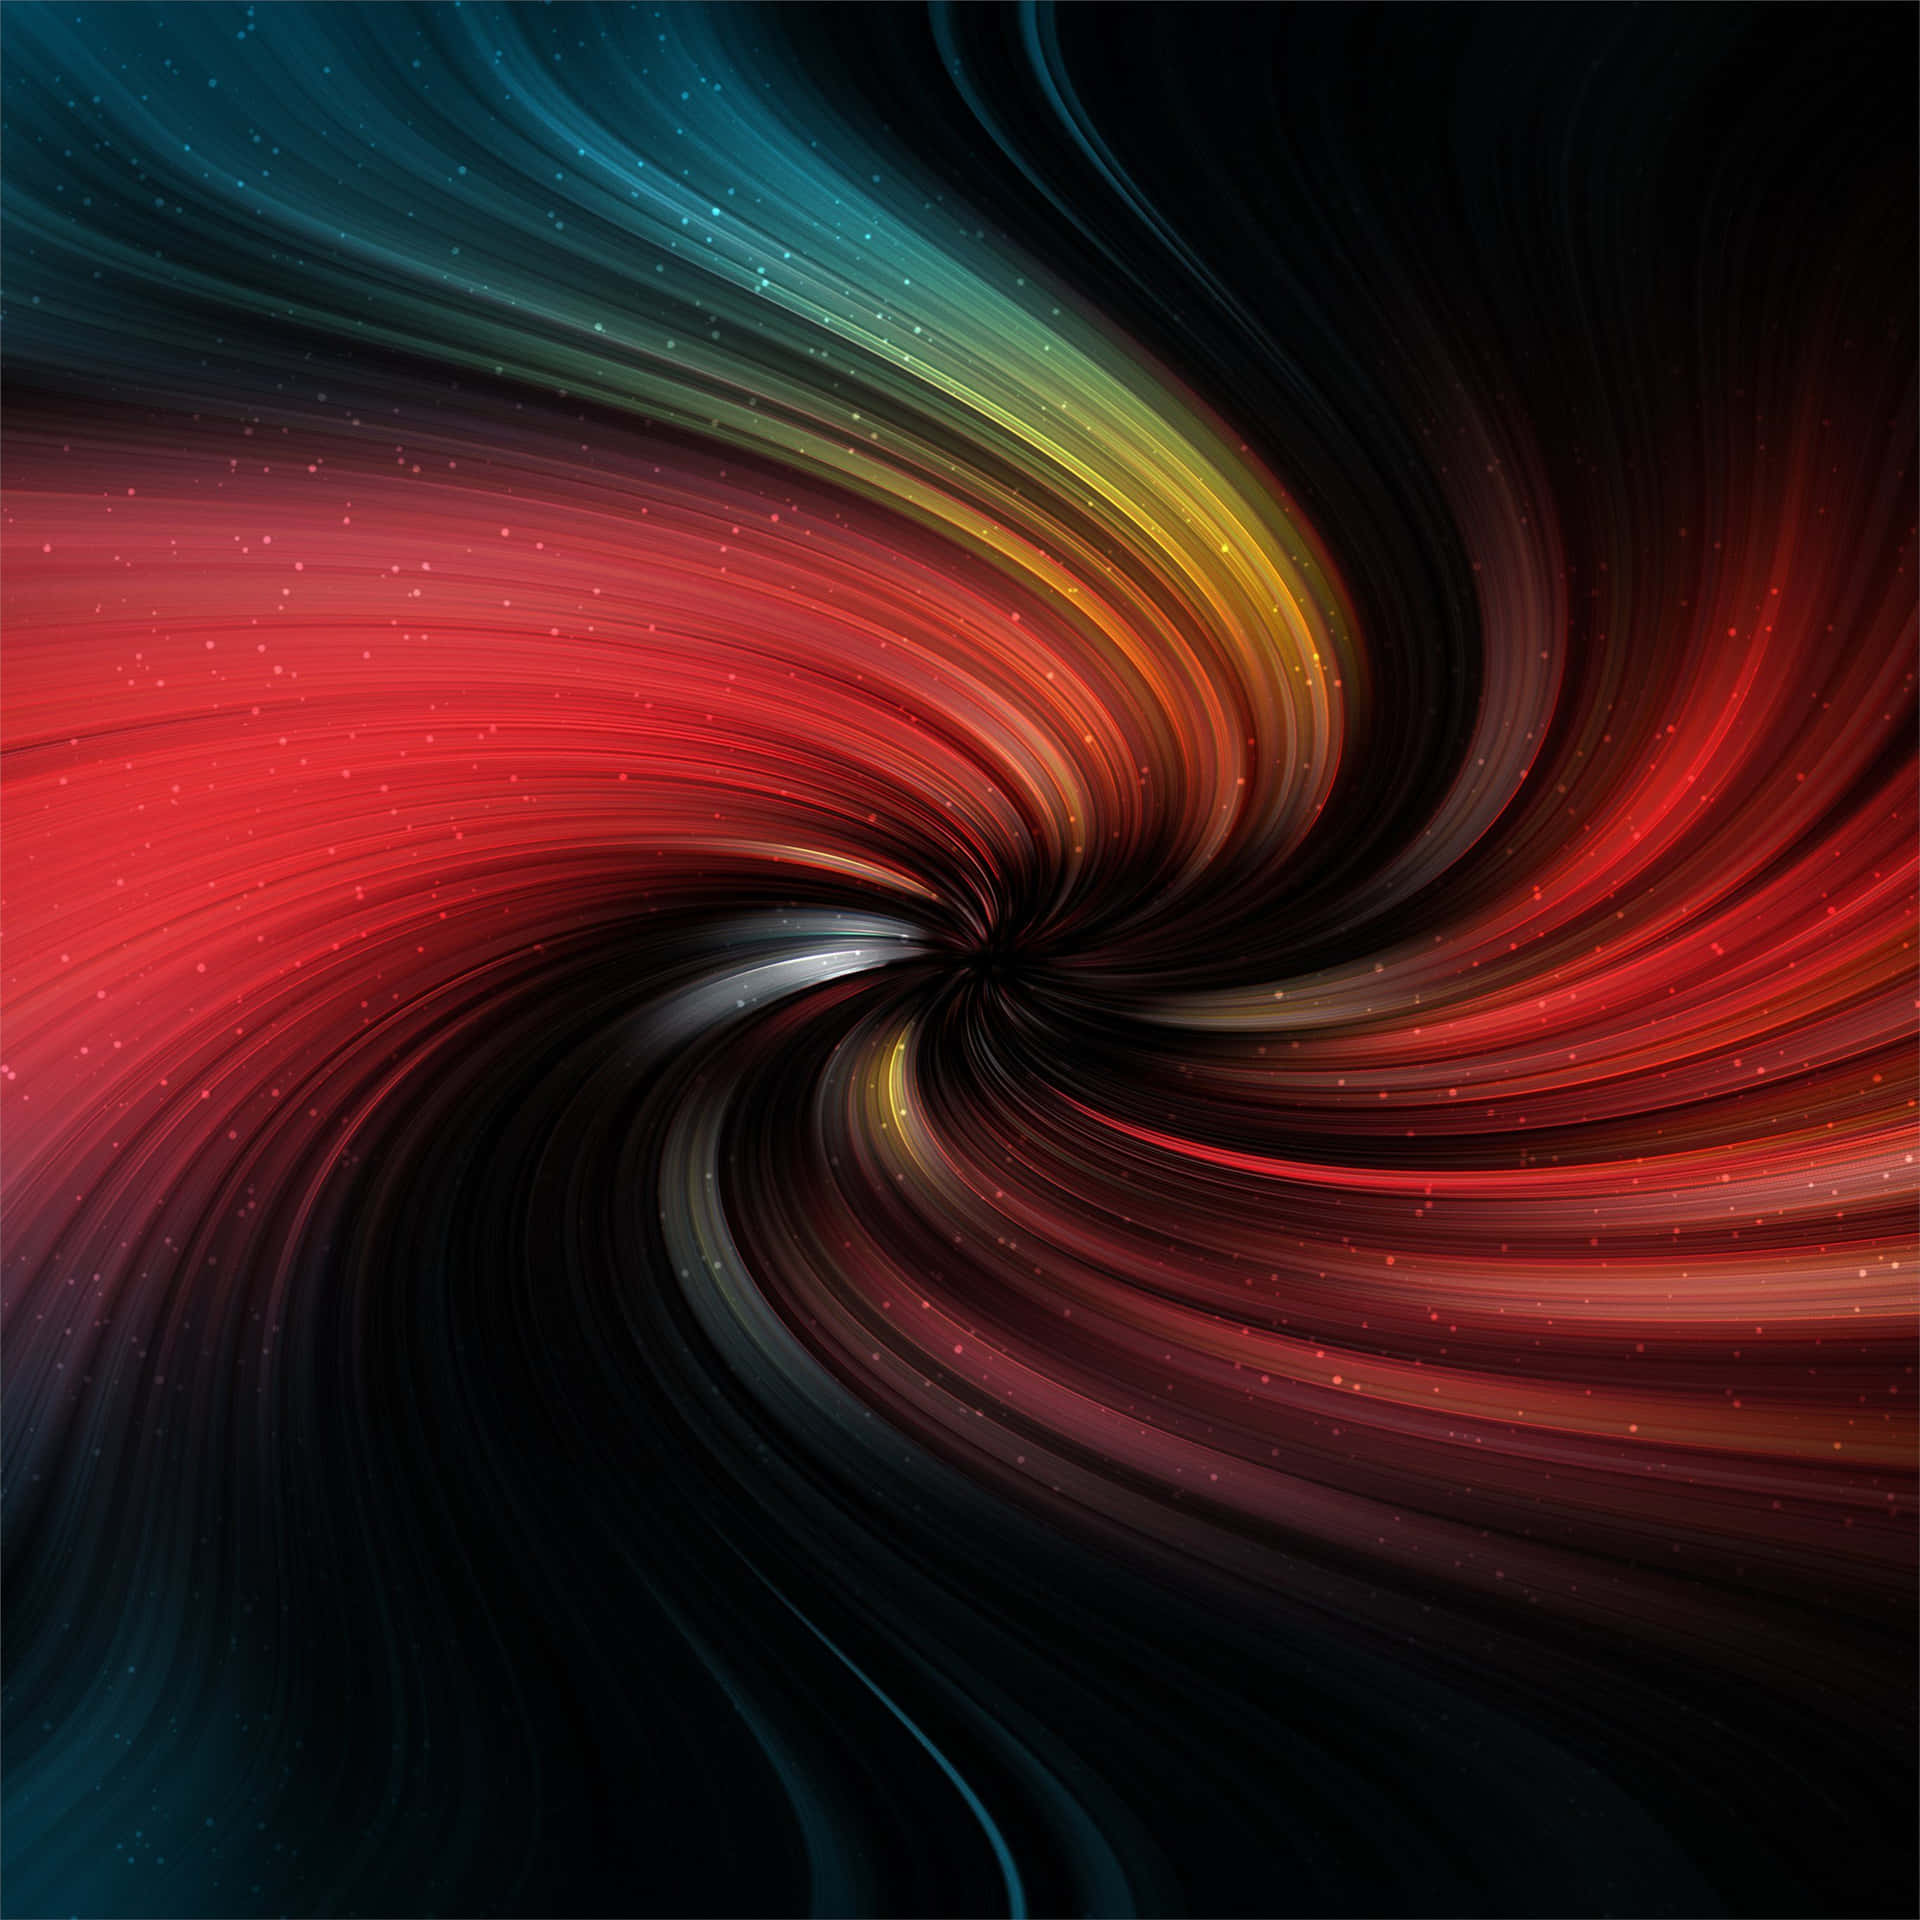 Abstract Swirling Background With Colorful Swirls Wallpaper